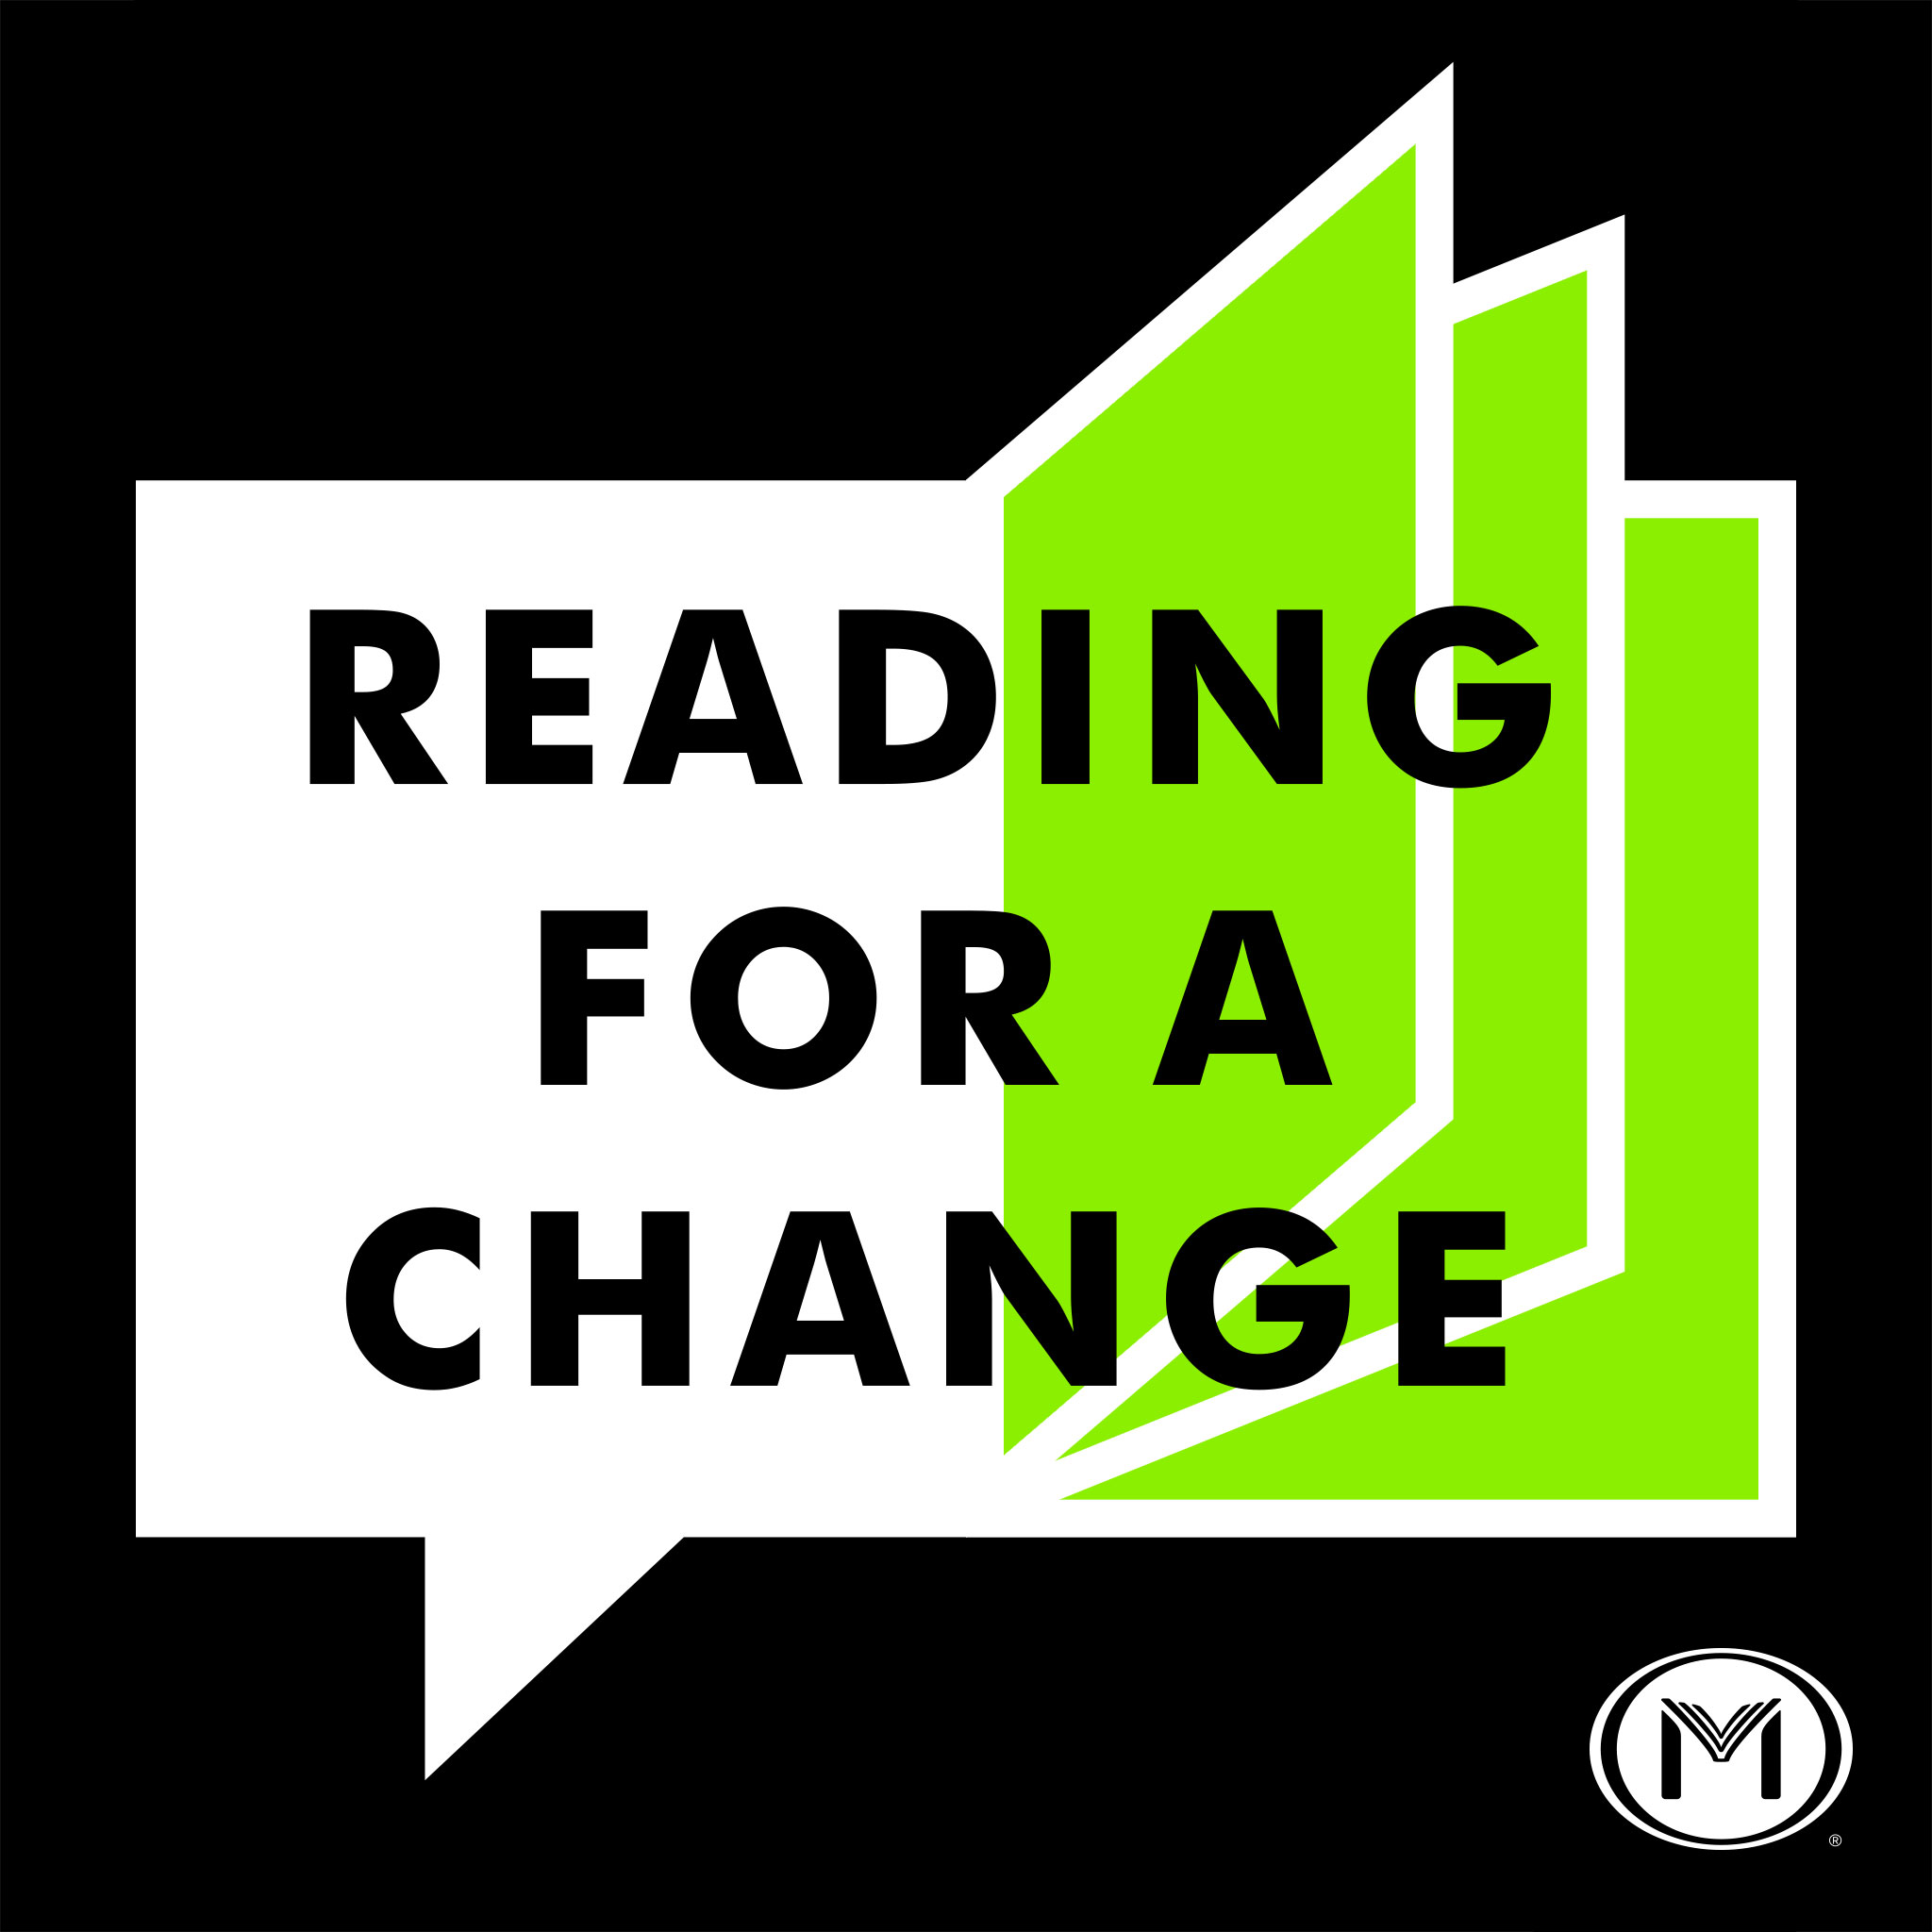 Introducing: Reading for a Change